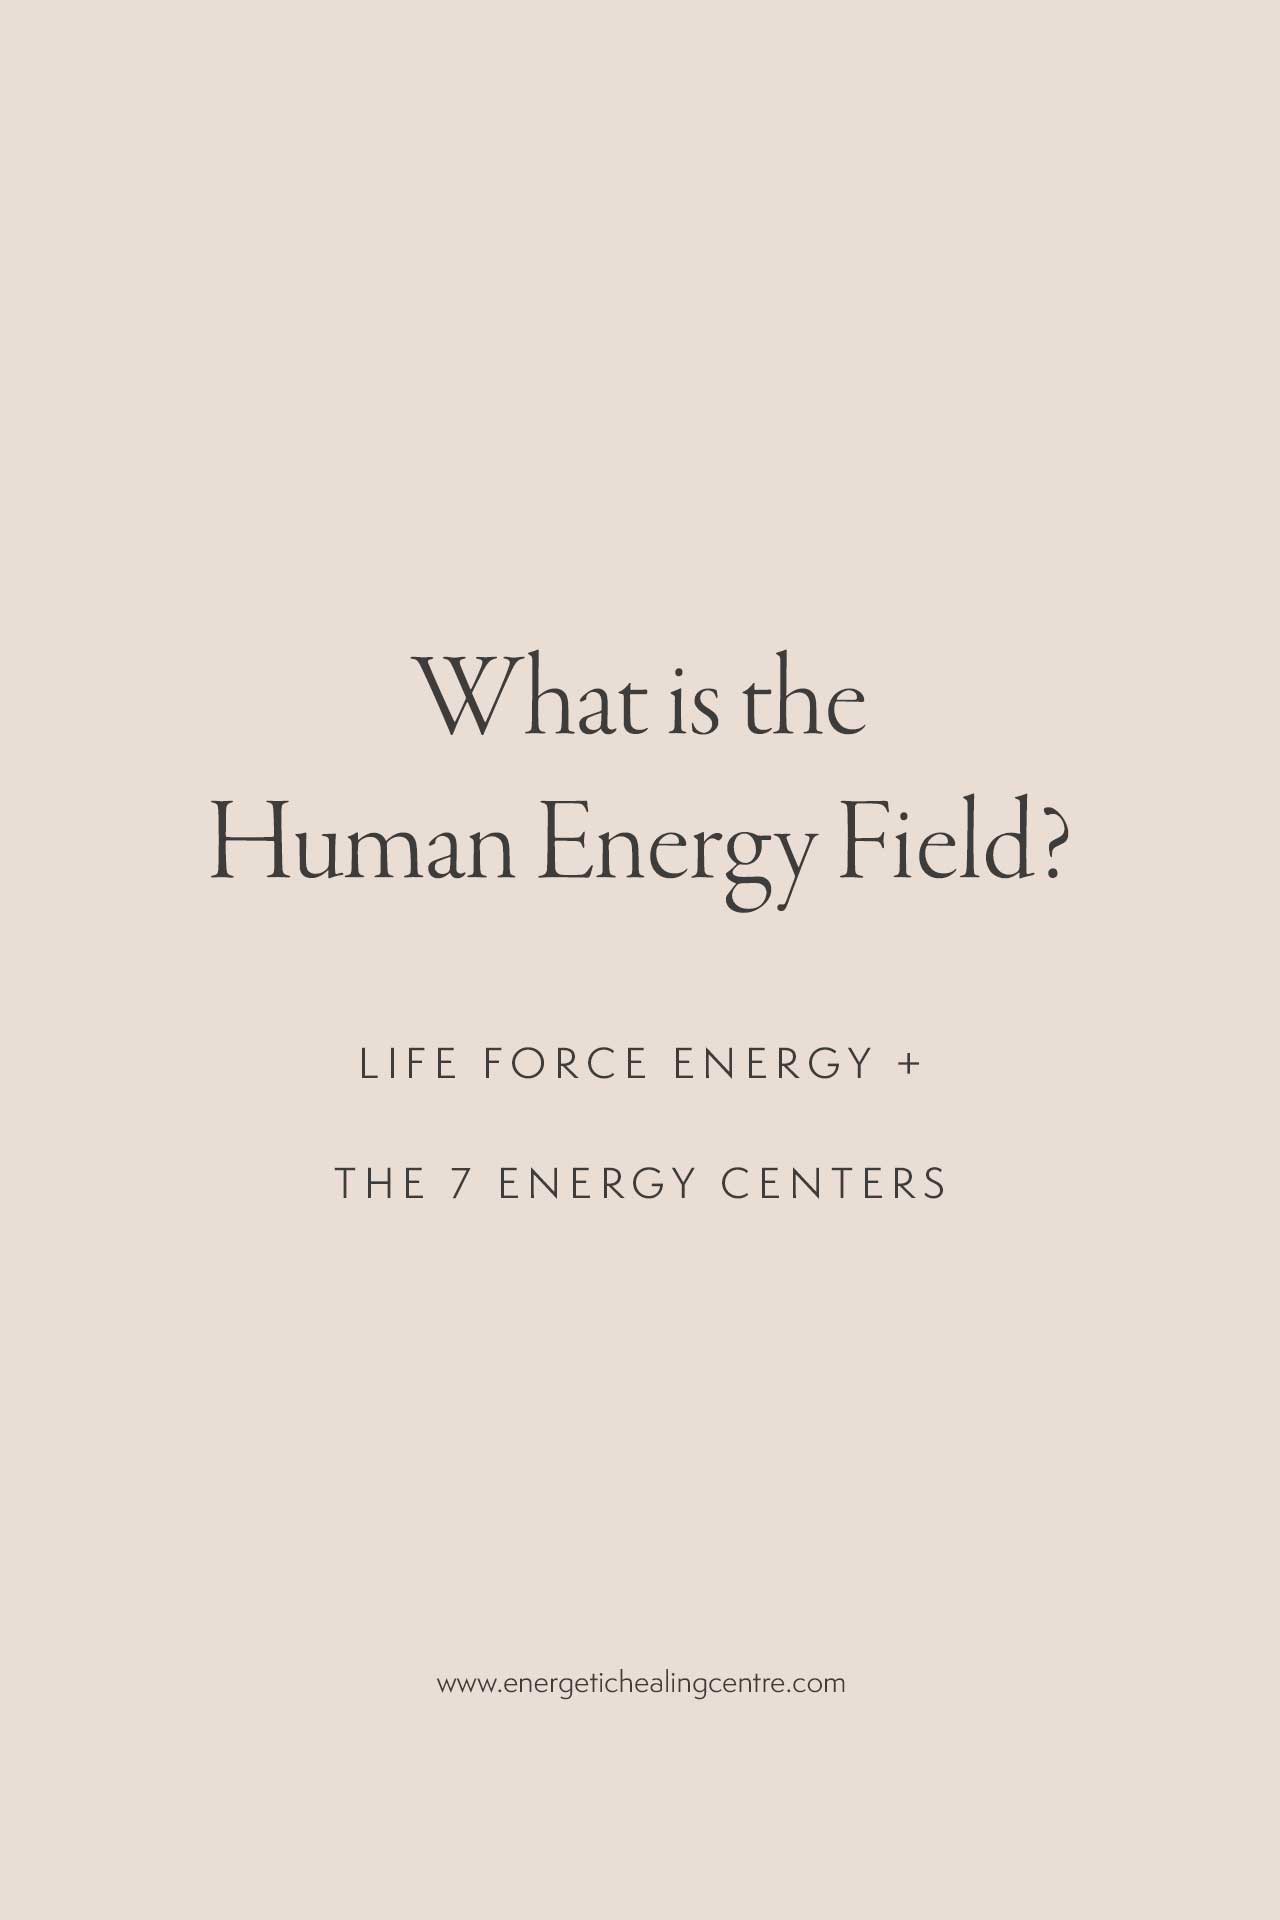 What is the Human Energy Field?